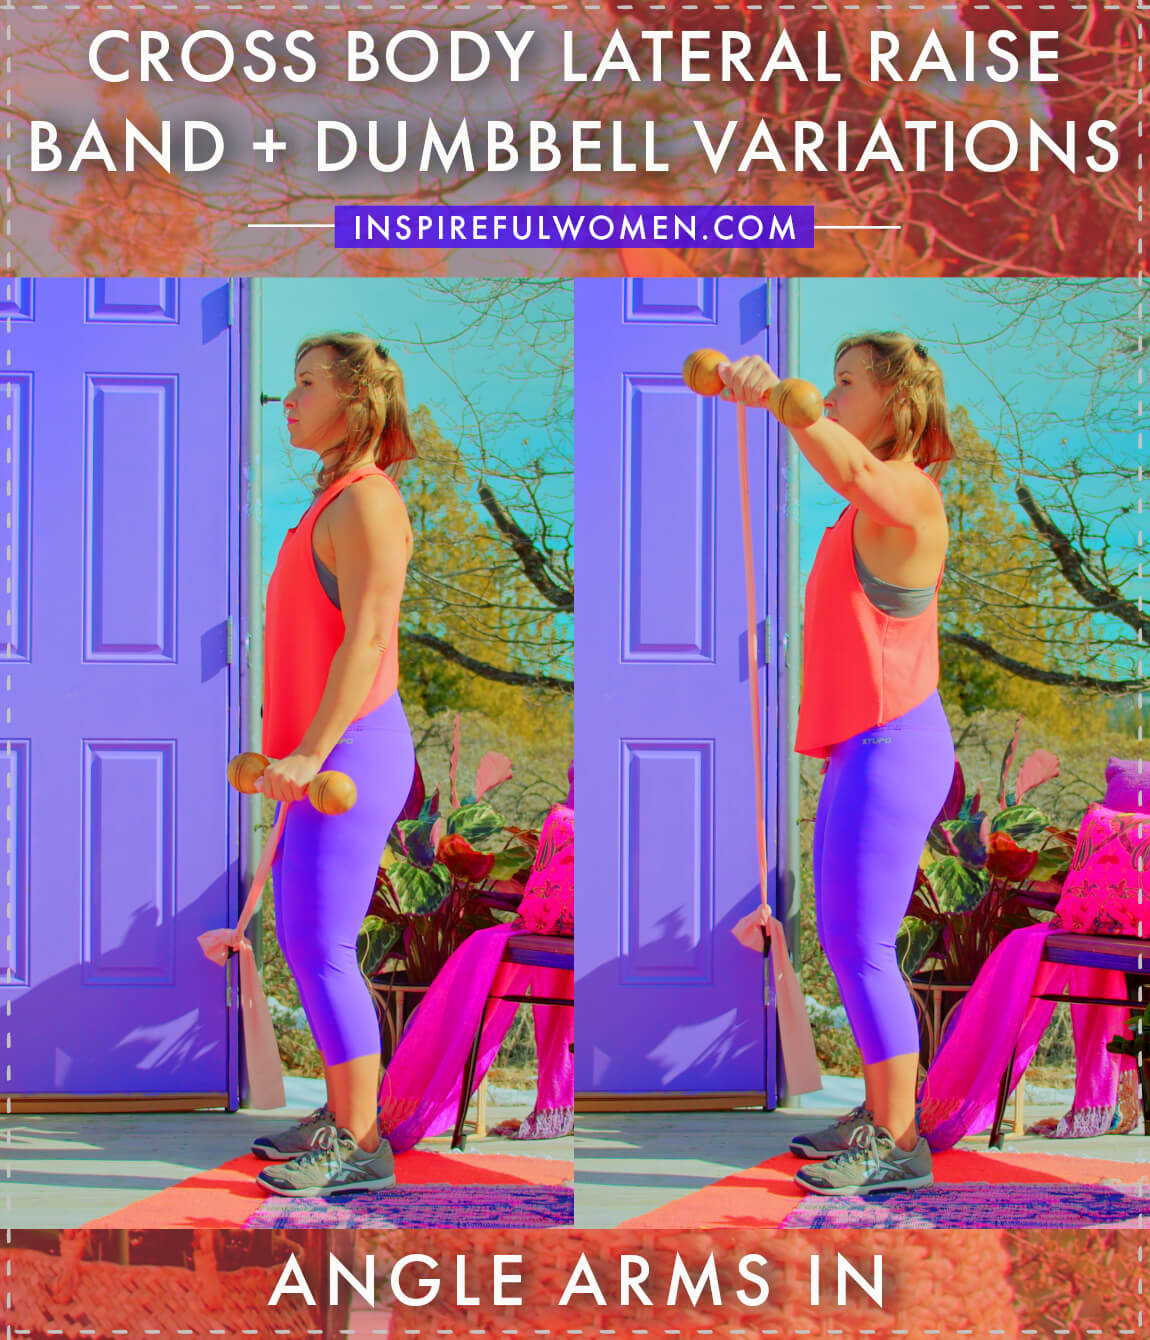 angle-arms-in-band-dumbbell-cross-body-lateral-raise-variation